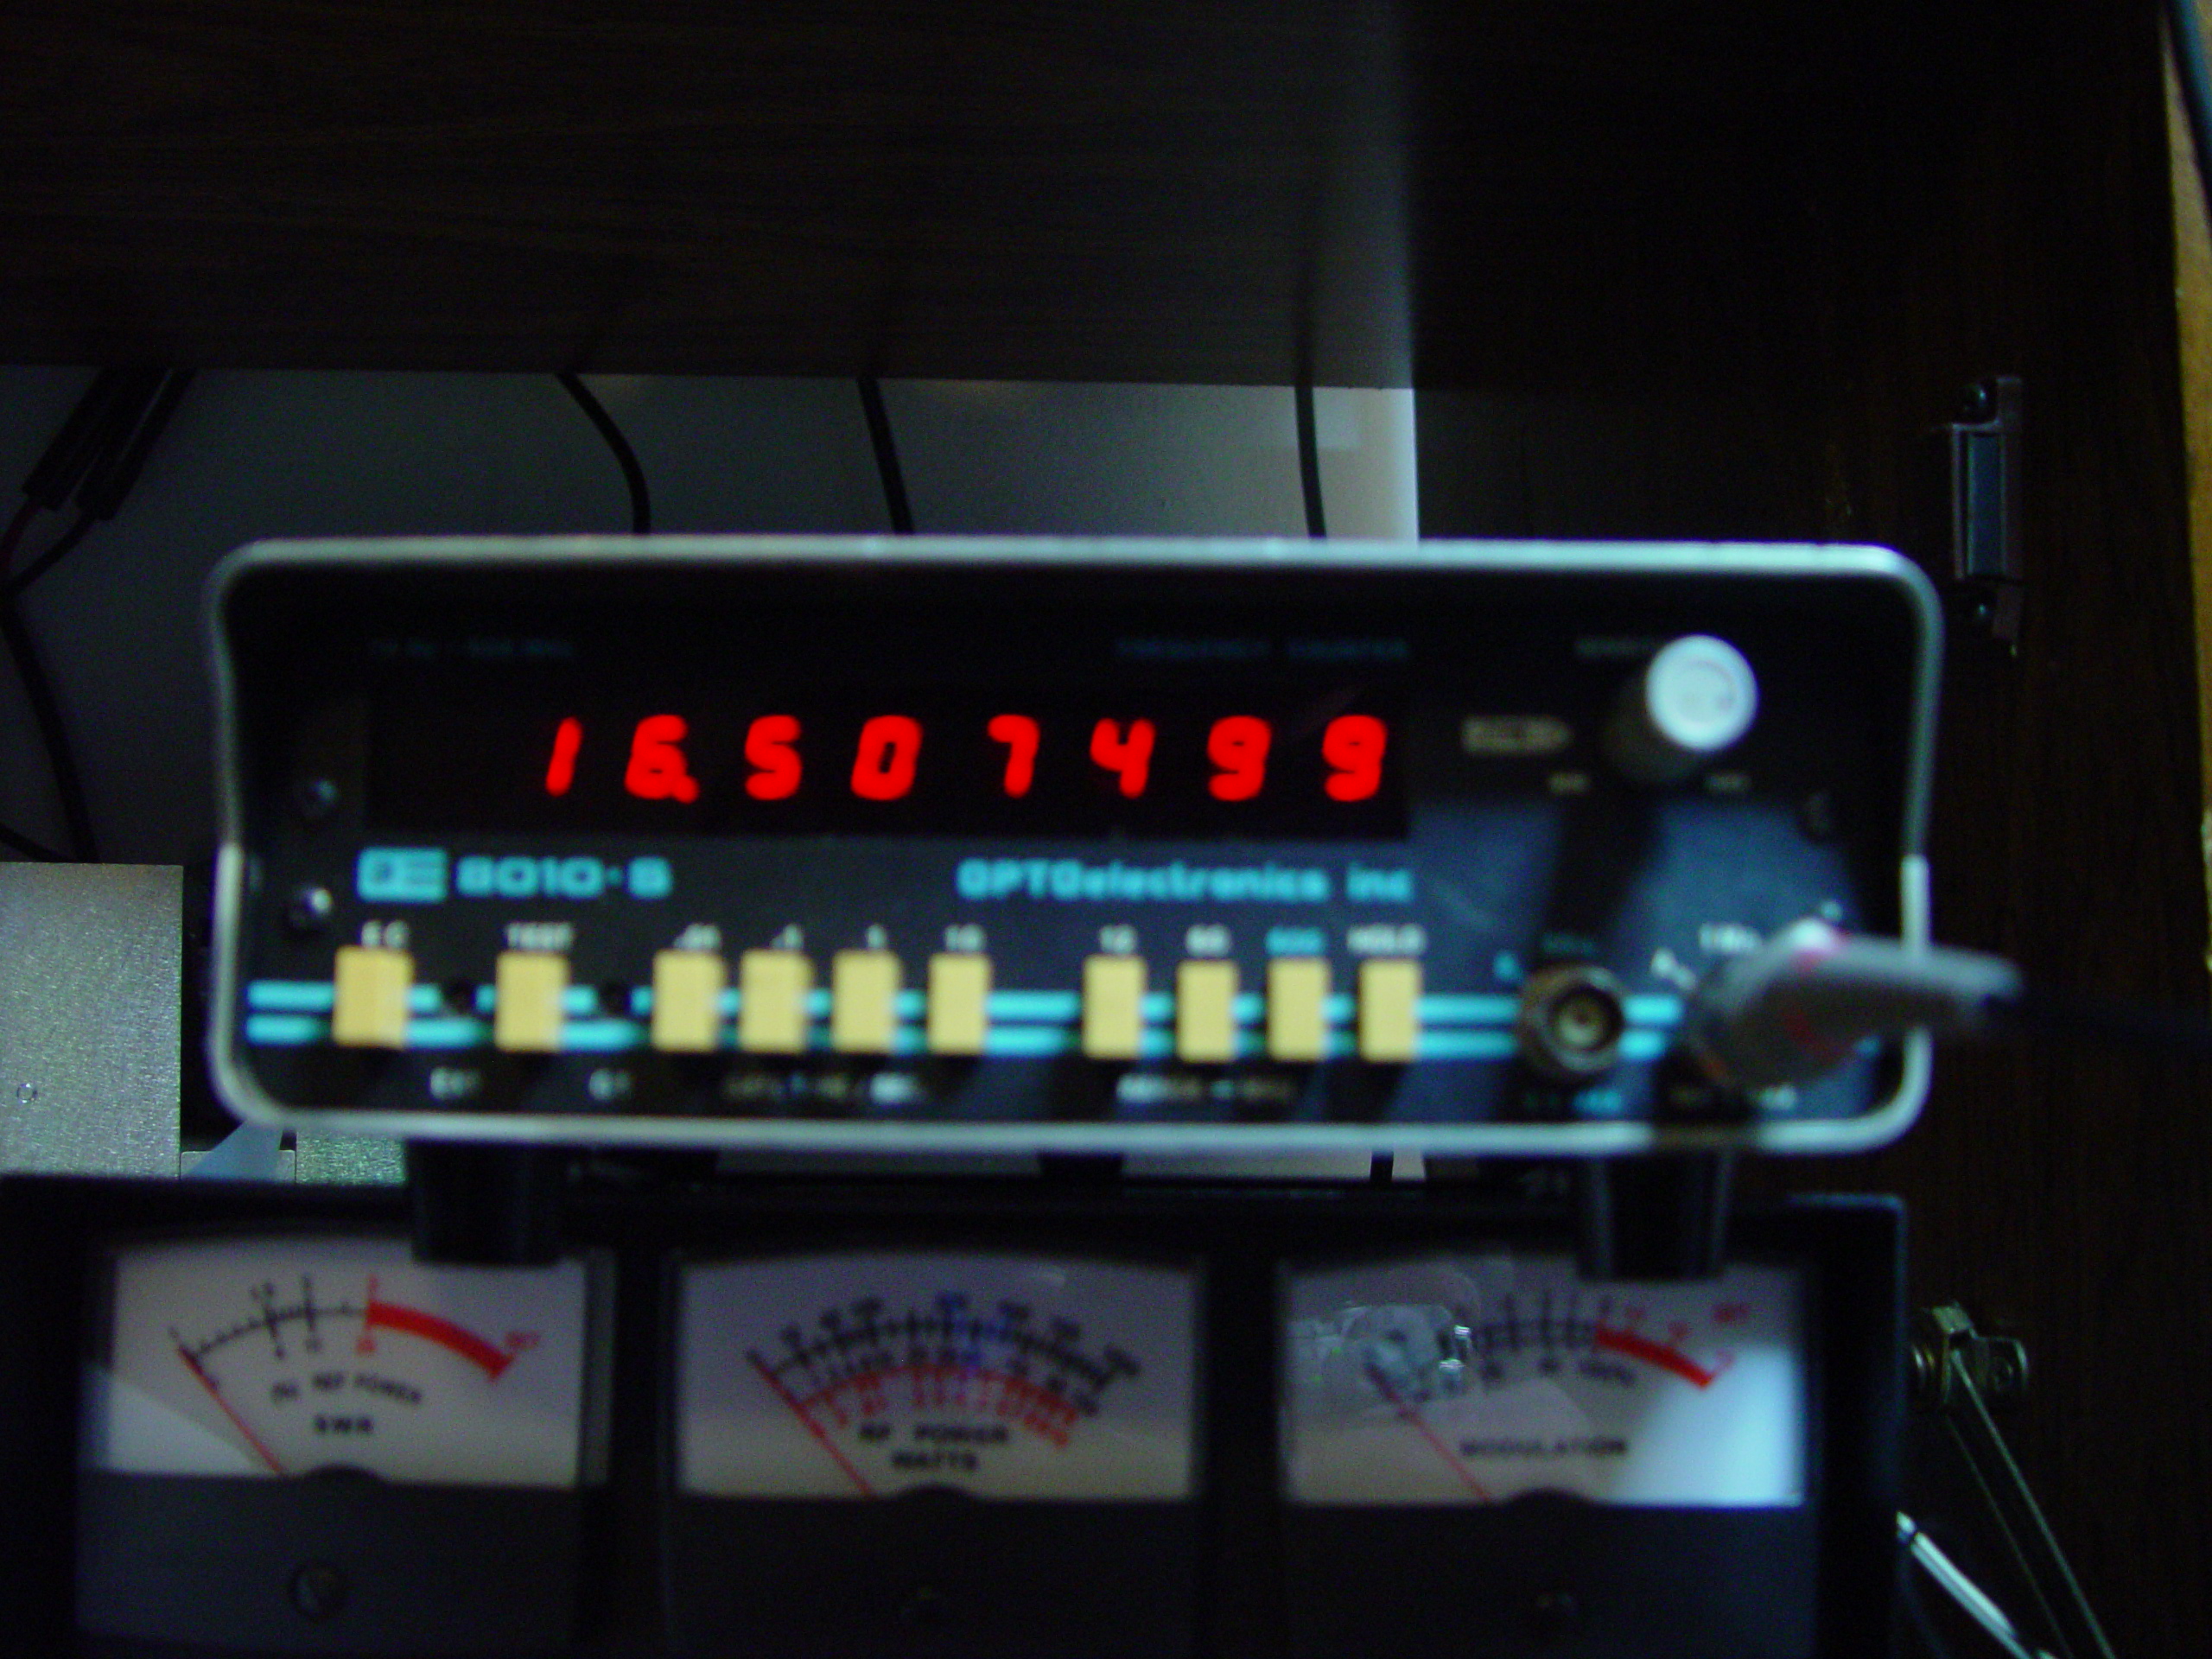 Calibrated Frequency counter